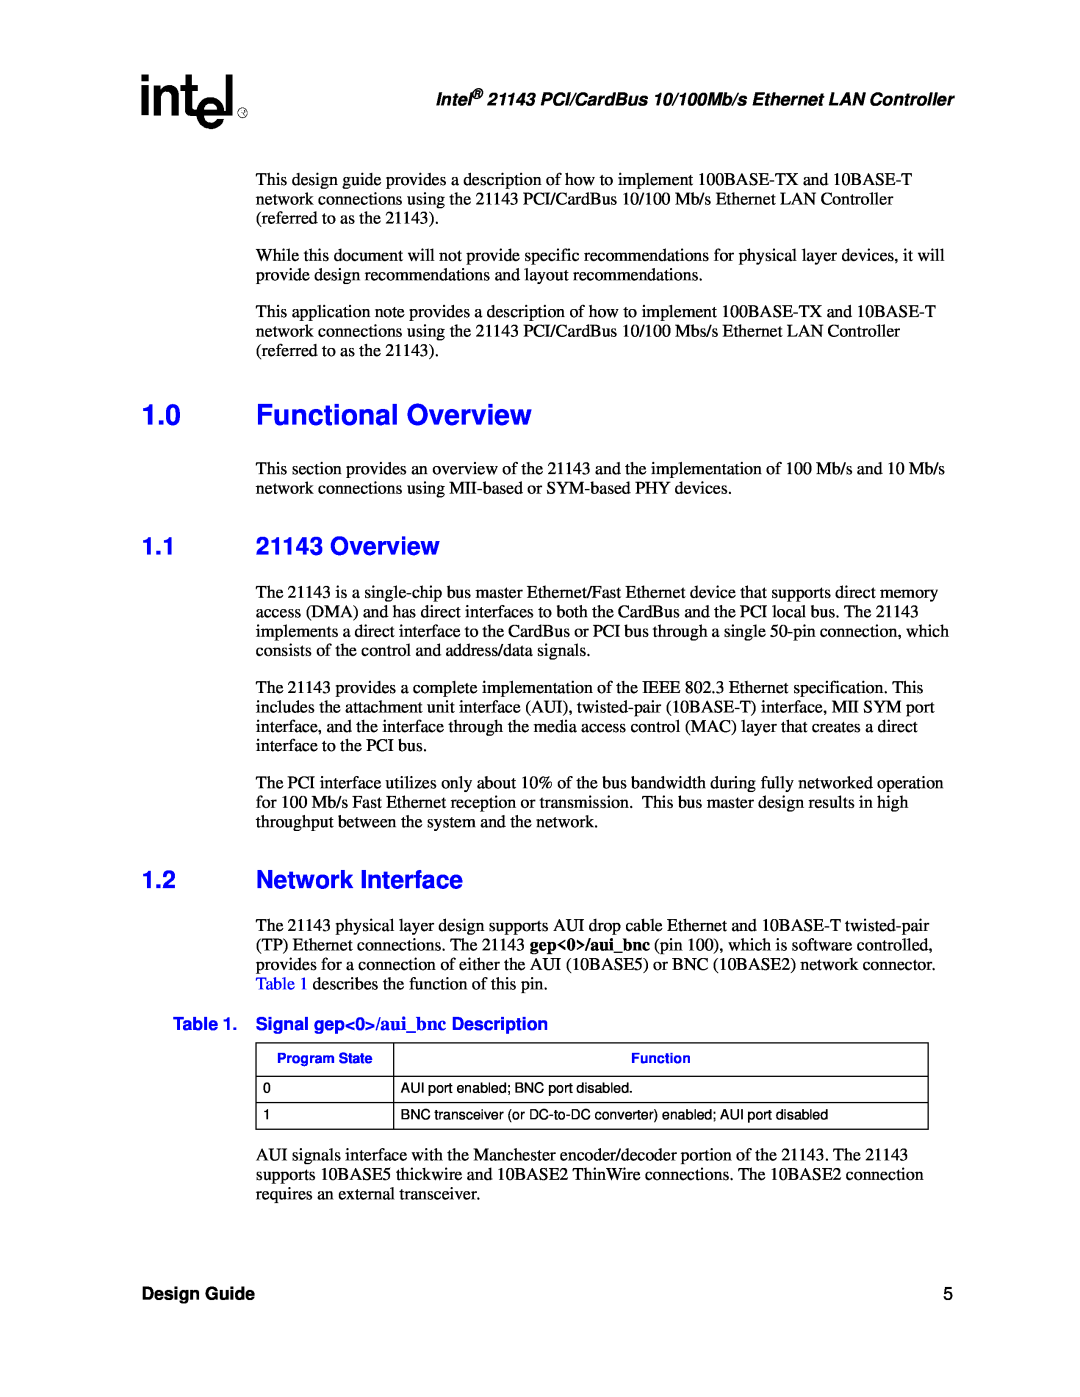 Intel manual Functional Overview, 1.1 21143 Overview, Network Interface, Signal gep0/auibnc Description, Design Guide 